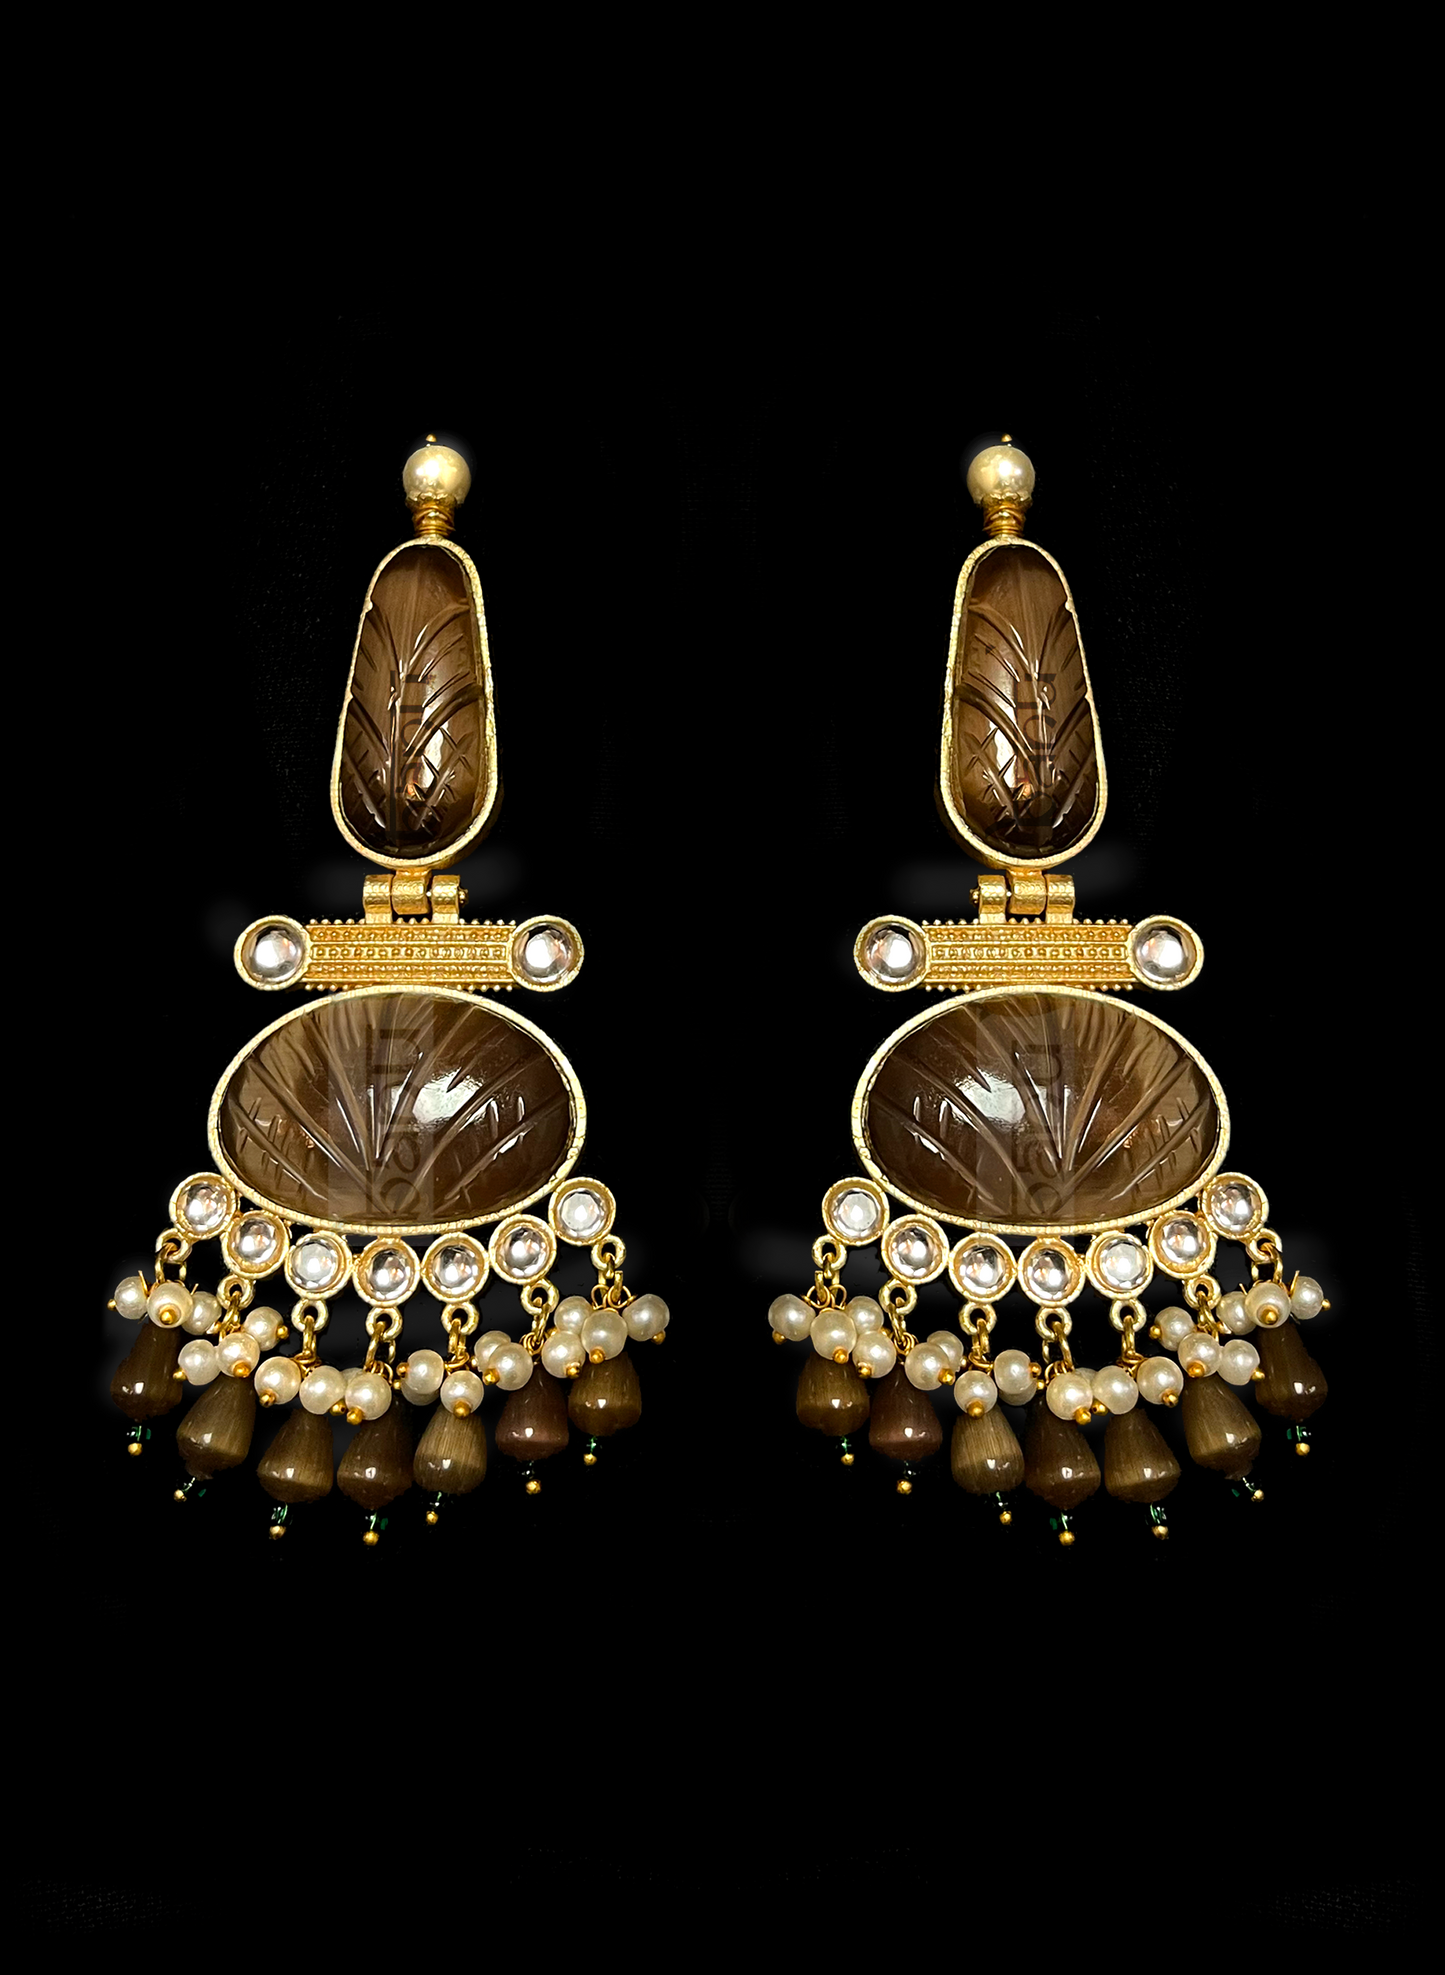 Tribal Amrapali Earrings in Brown with Pearls for Indian Women